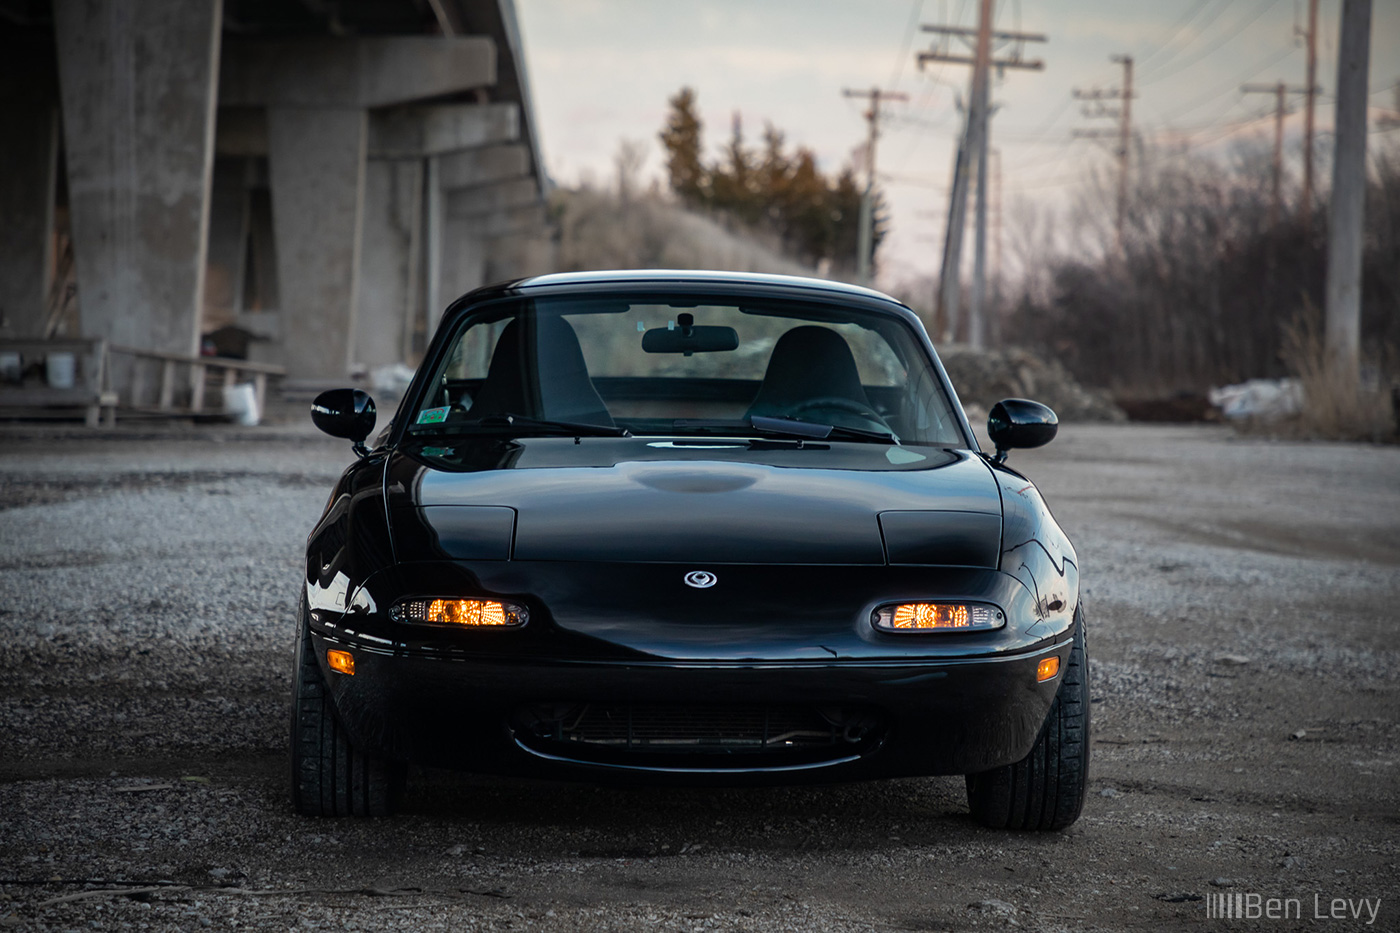 Front of Black Miata with Smoked Turn Signals